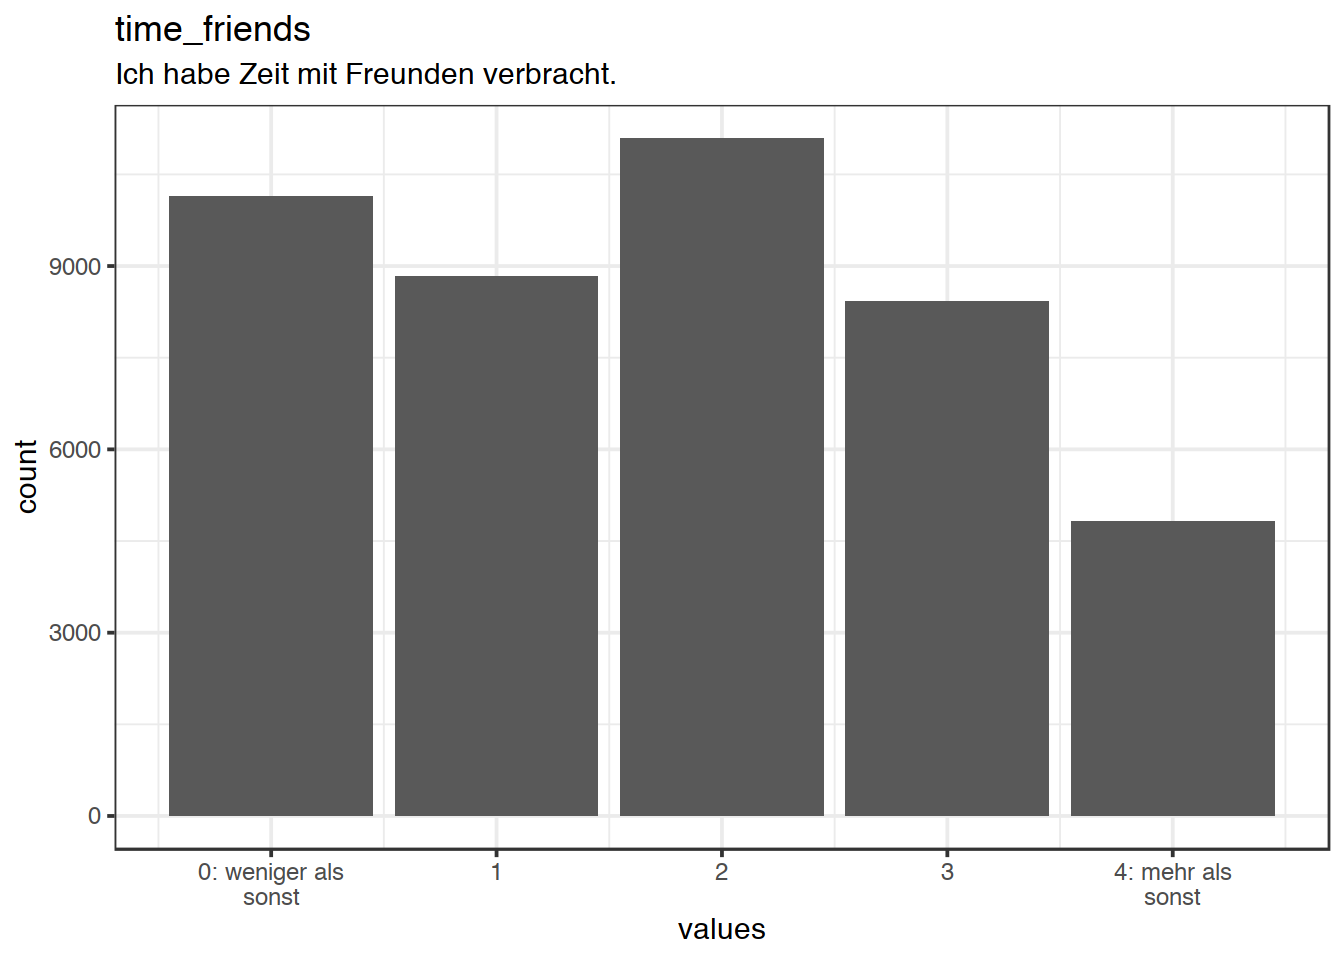 Distribution of values for time_friends